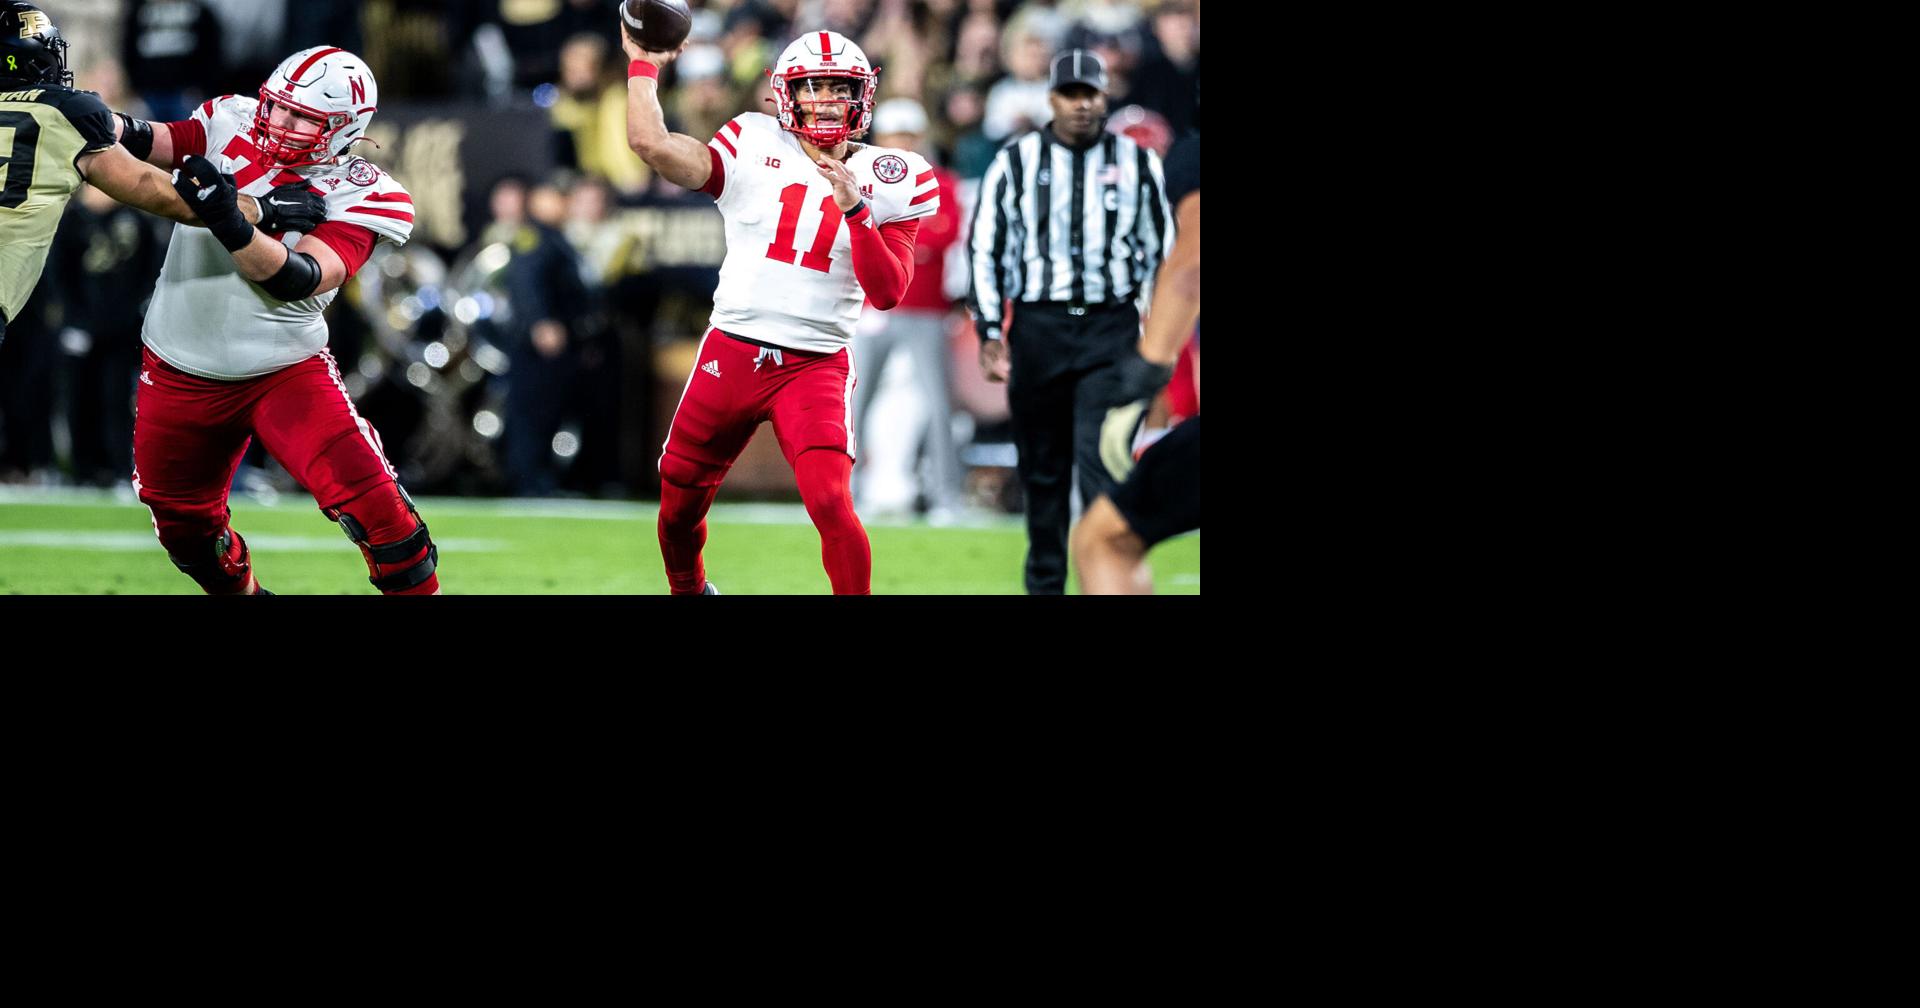 Casey Thompson says Nebraska’s offense was ‘hit and miss’ against Purdue